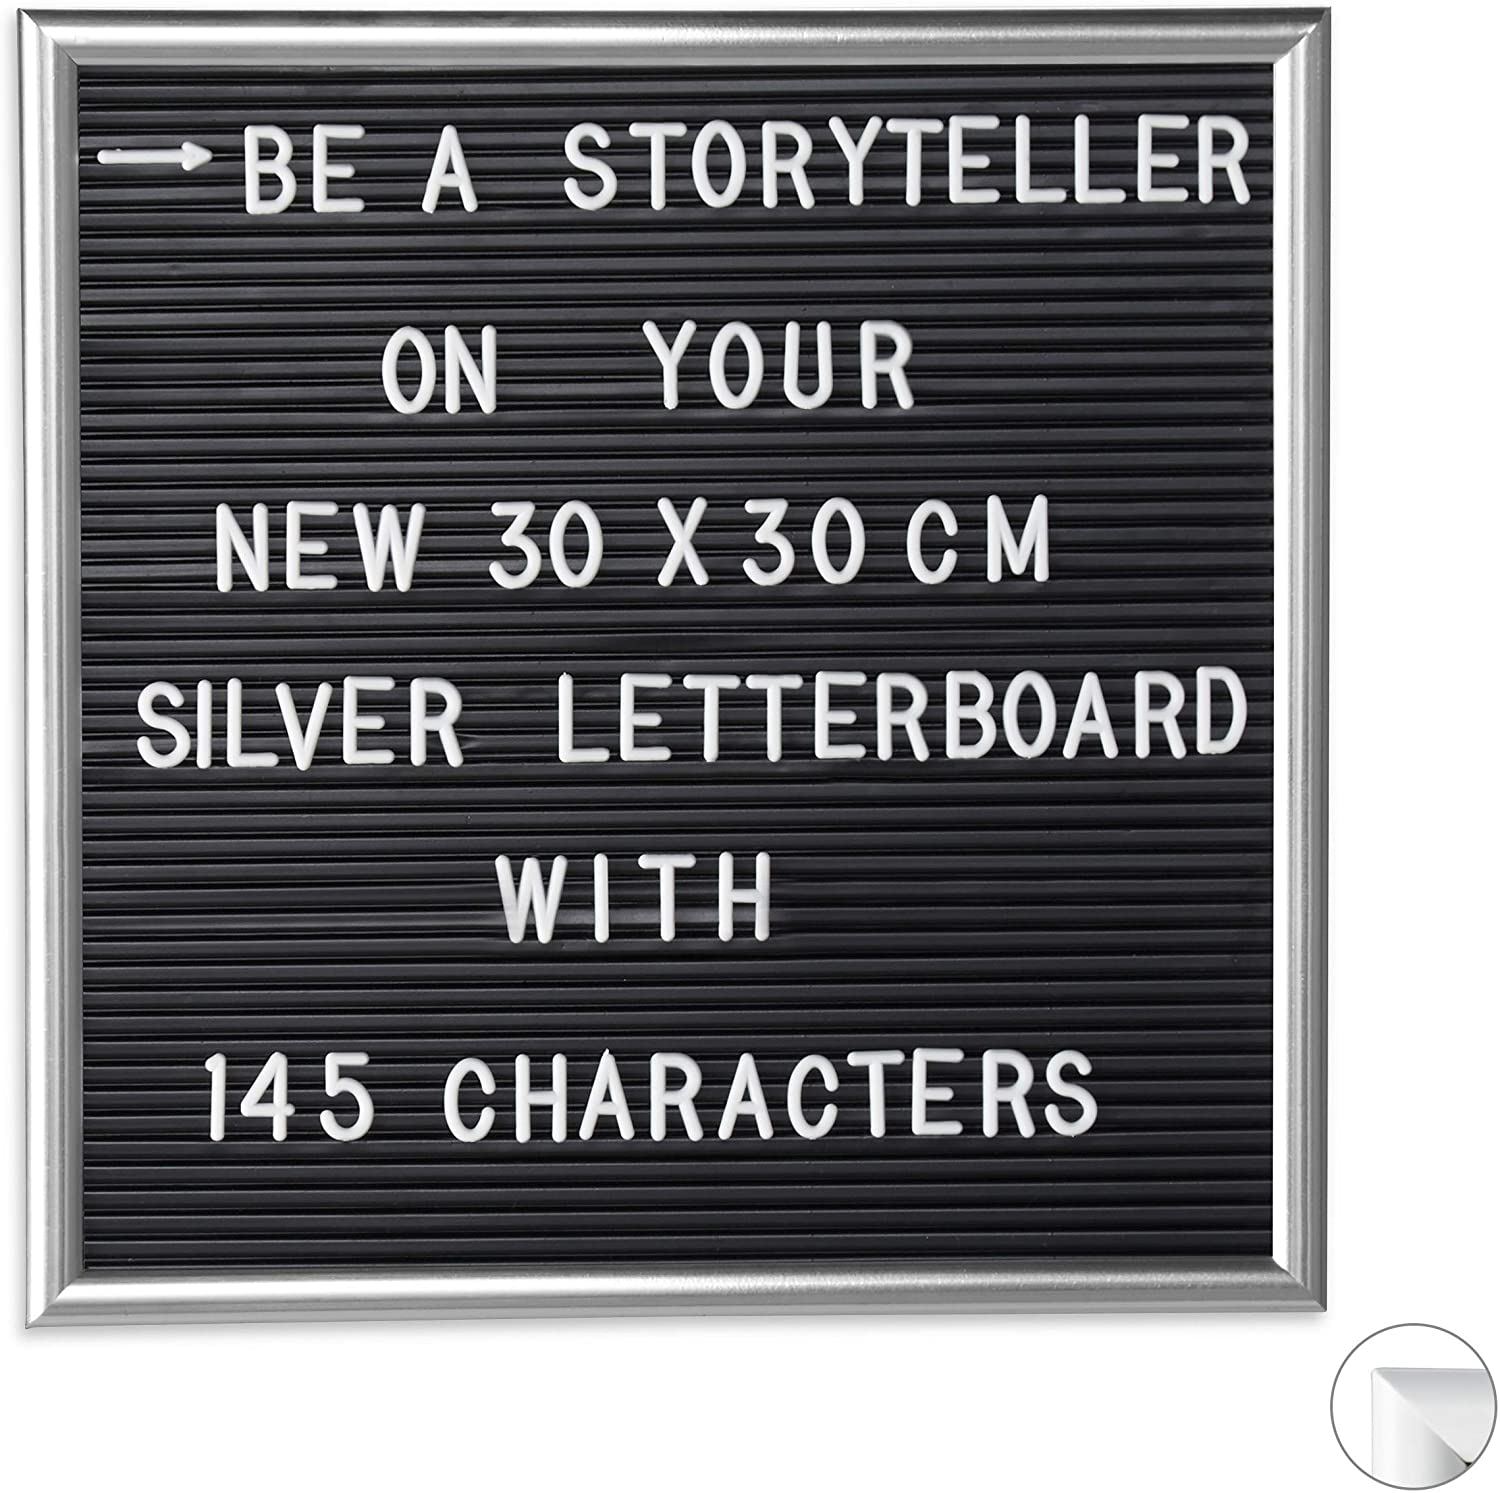 1 x letterboard with wooden frame, 145 letters, numbers and special characters, grooved board for plugging, 30 x 30 cm, silver.